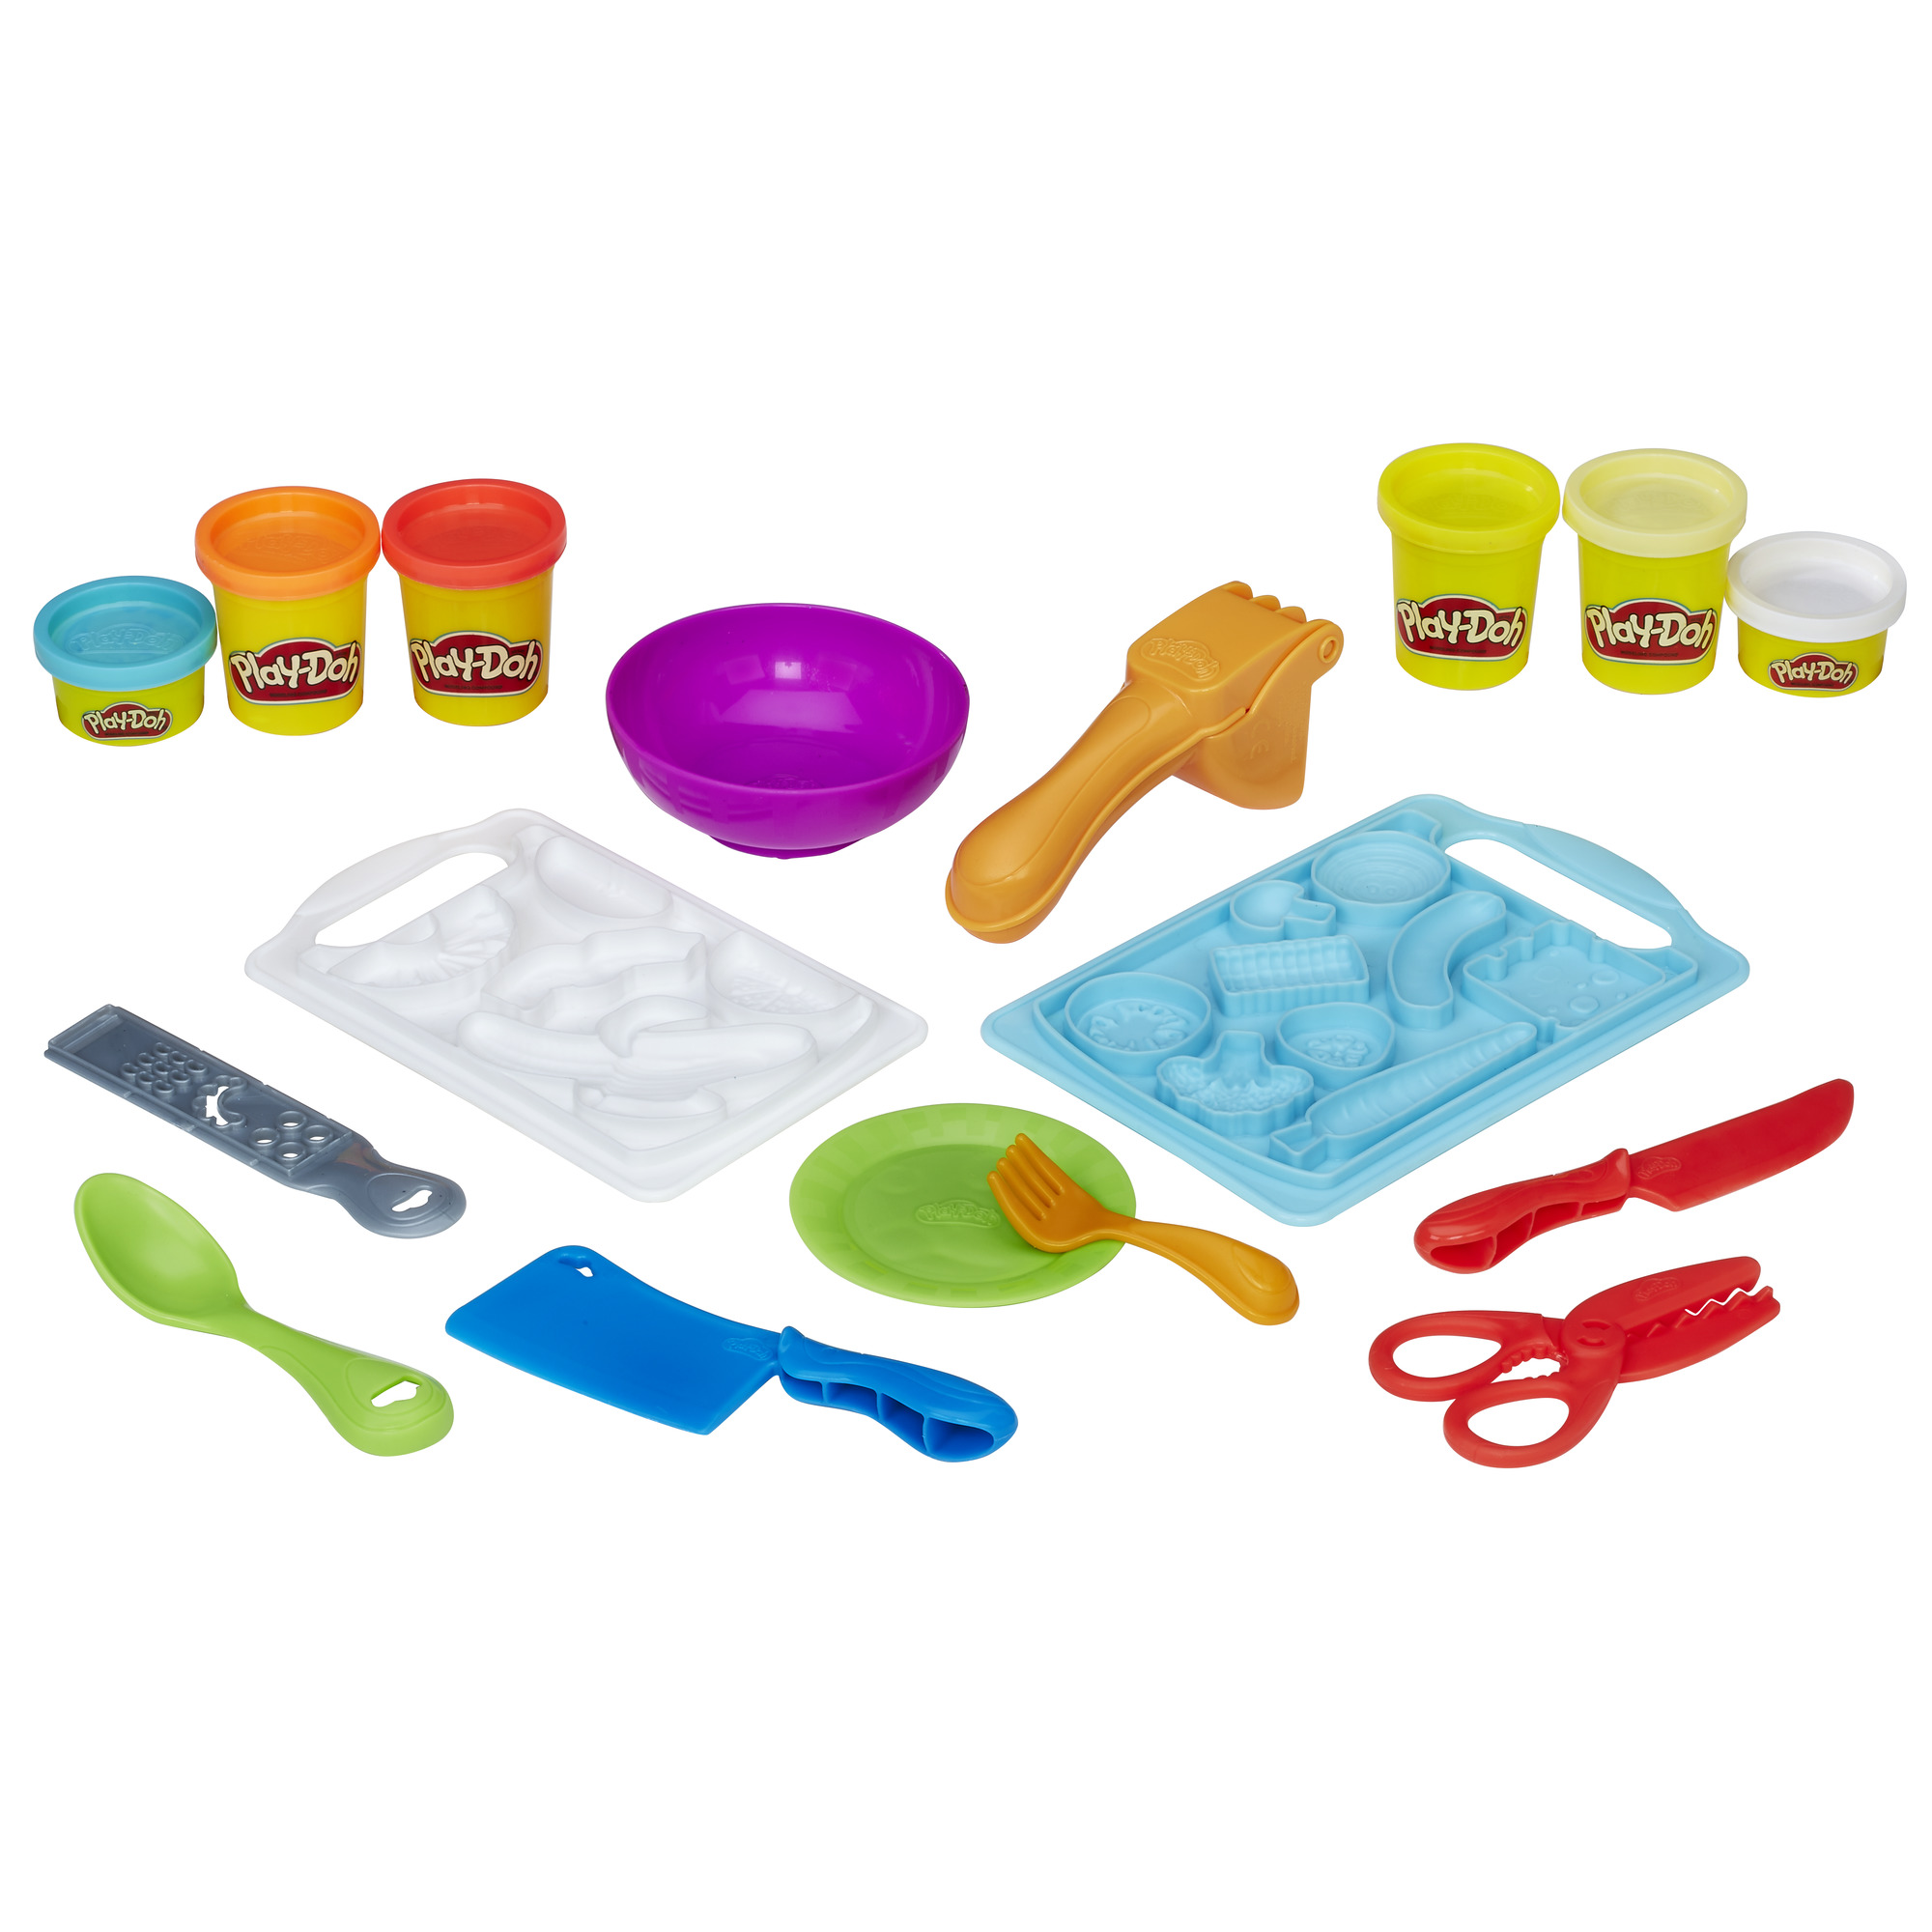 Play-Doh Kitchen Creations Shape 'N Slice Food Set with 6 Cans of Play-Doh - image 2 of 2